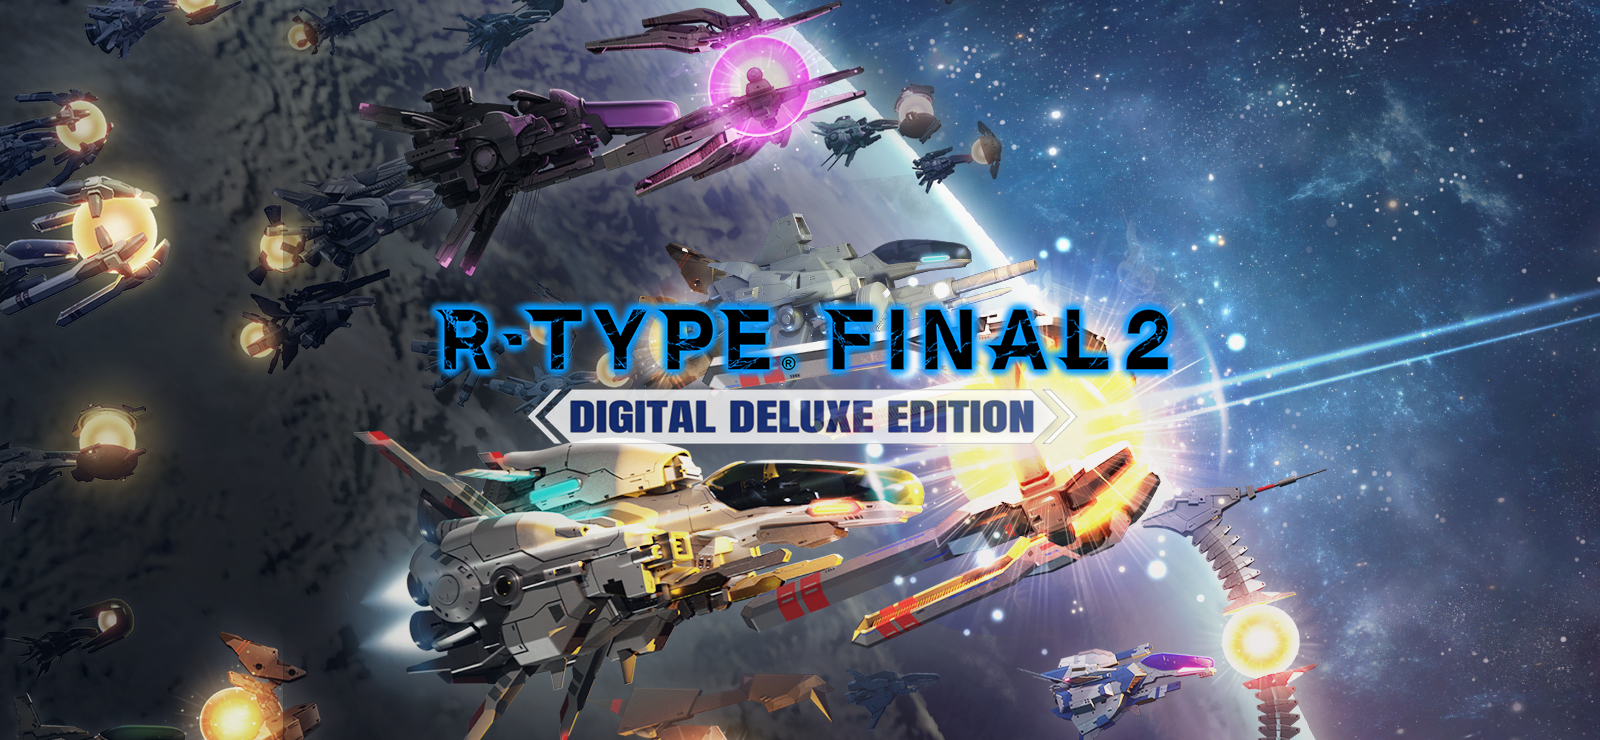 R-Type Final 2 - Digital Deluxe Edition